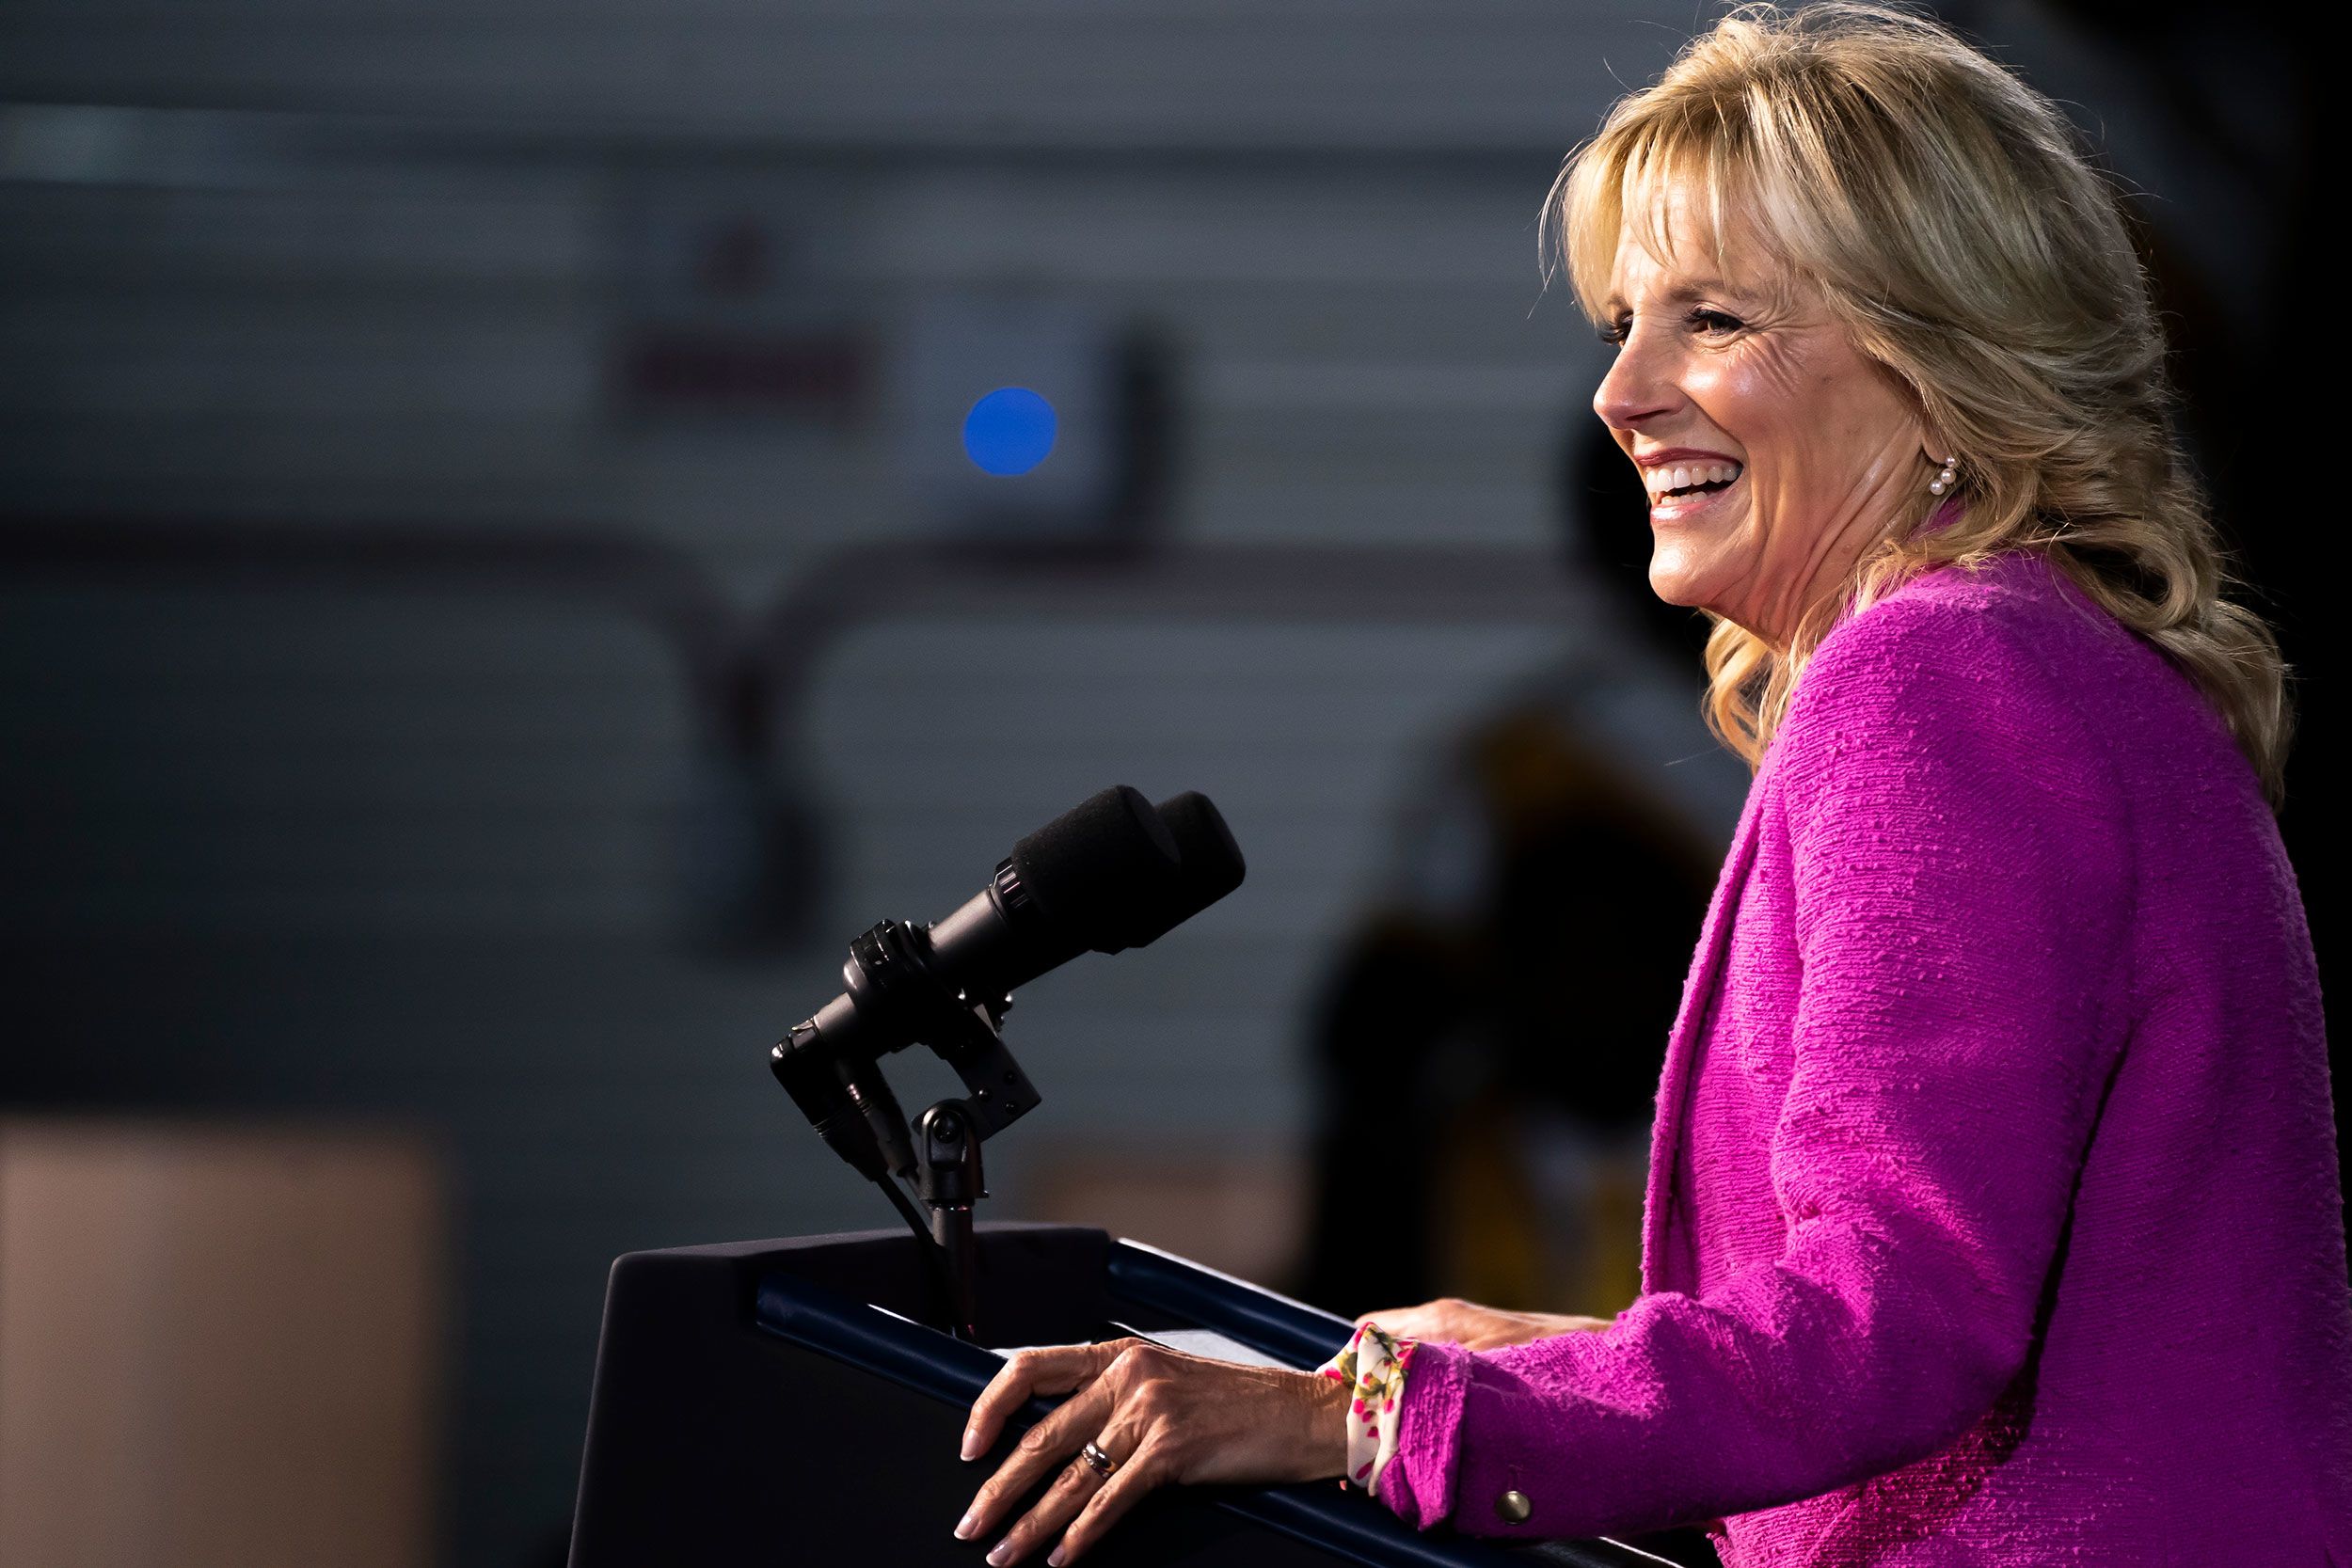 Jill Biden shares how she finds time for herself and her 'inner strength